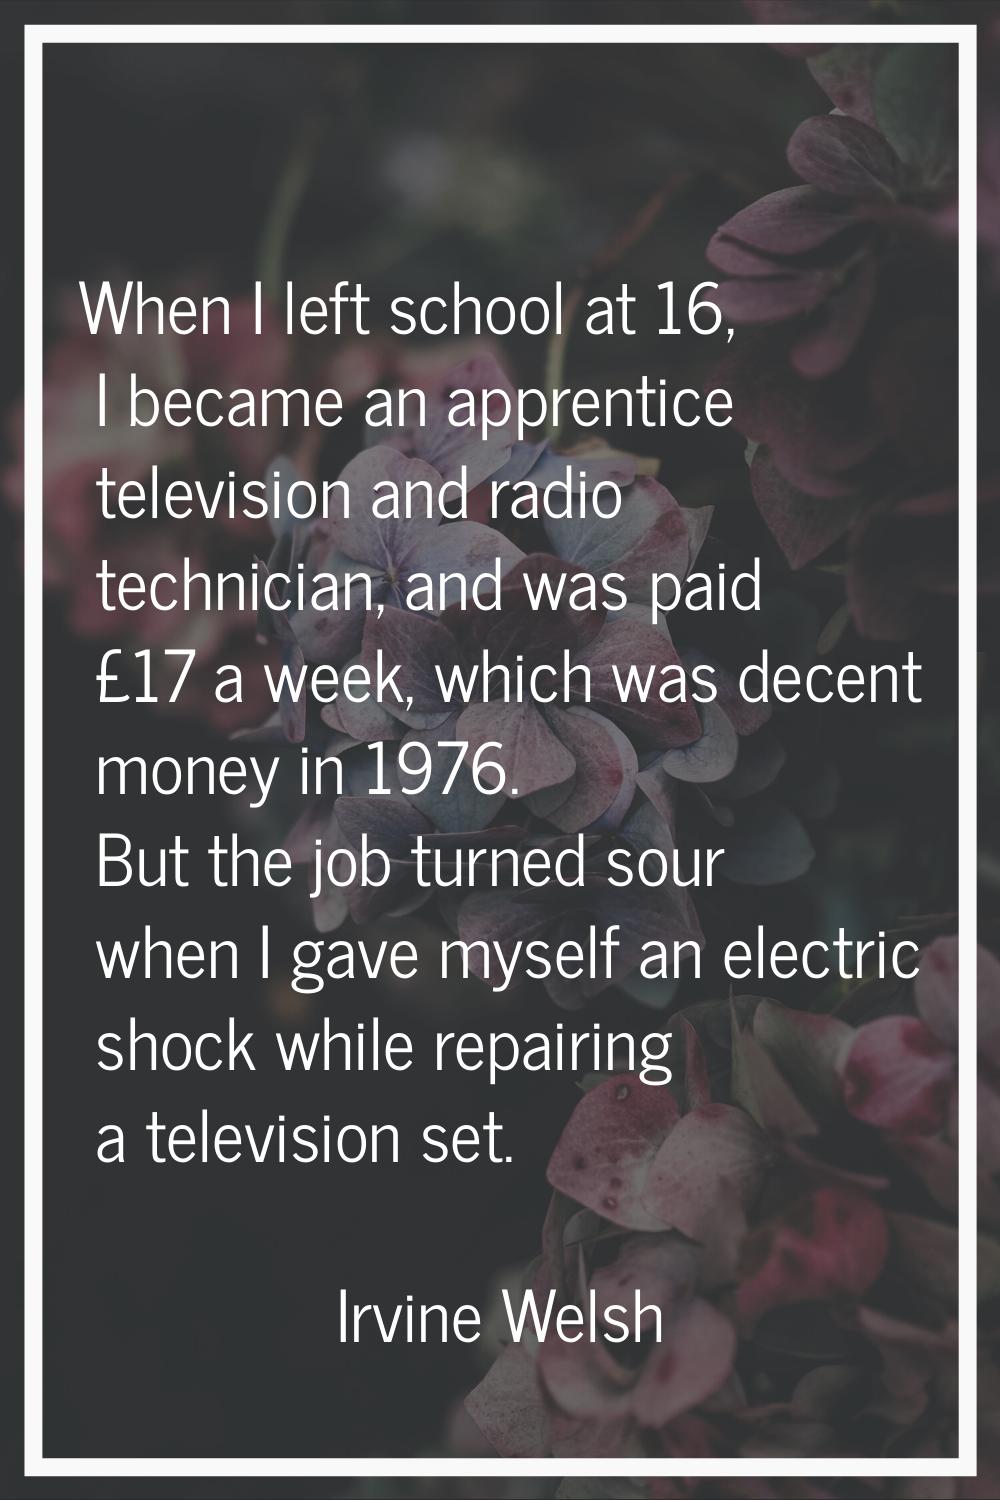 When I left school at 16, I became an apprentice television and radio technician, and was paid £17 